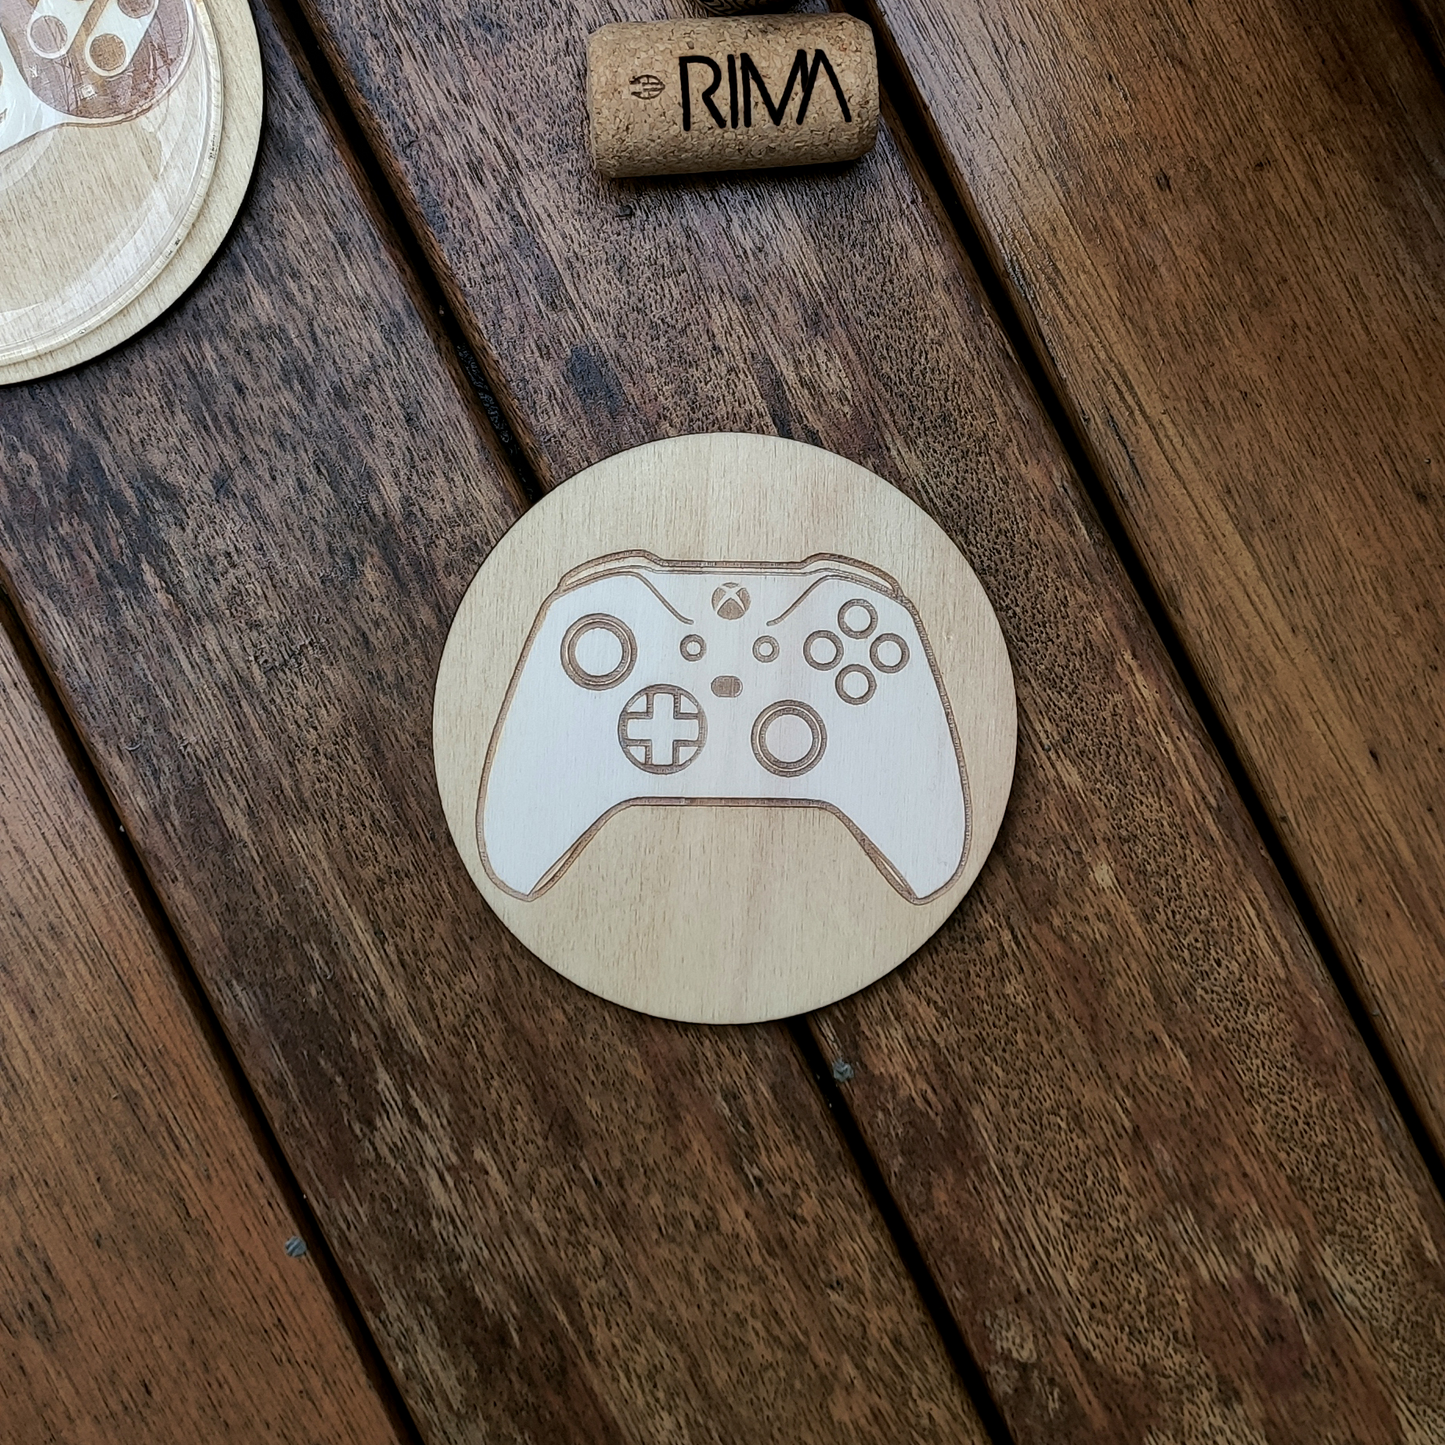 Set of 6 Video Games Wood Coasters - Housewarming Gift - Controllers - Gamer